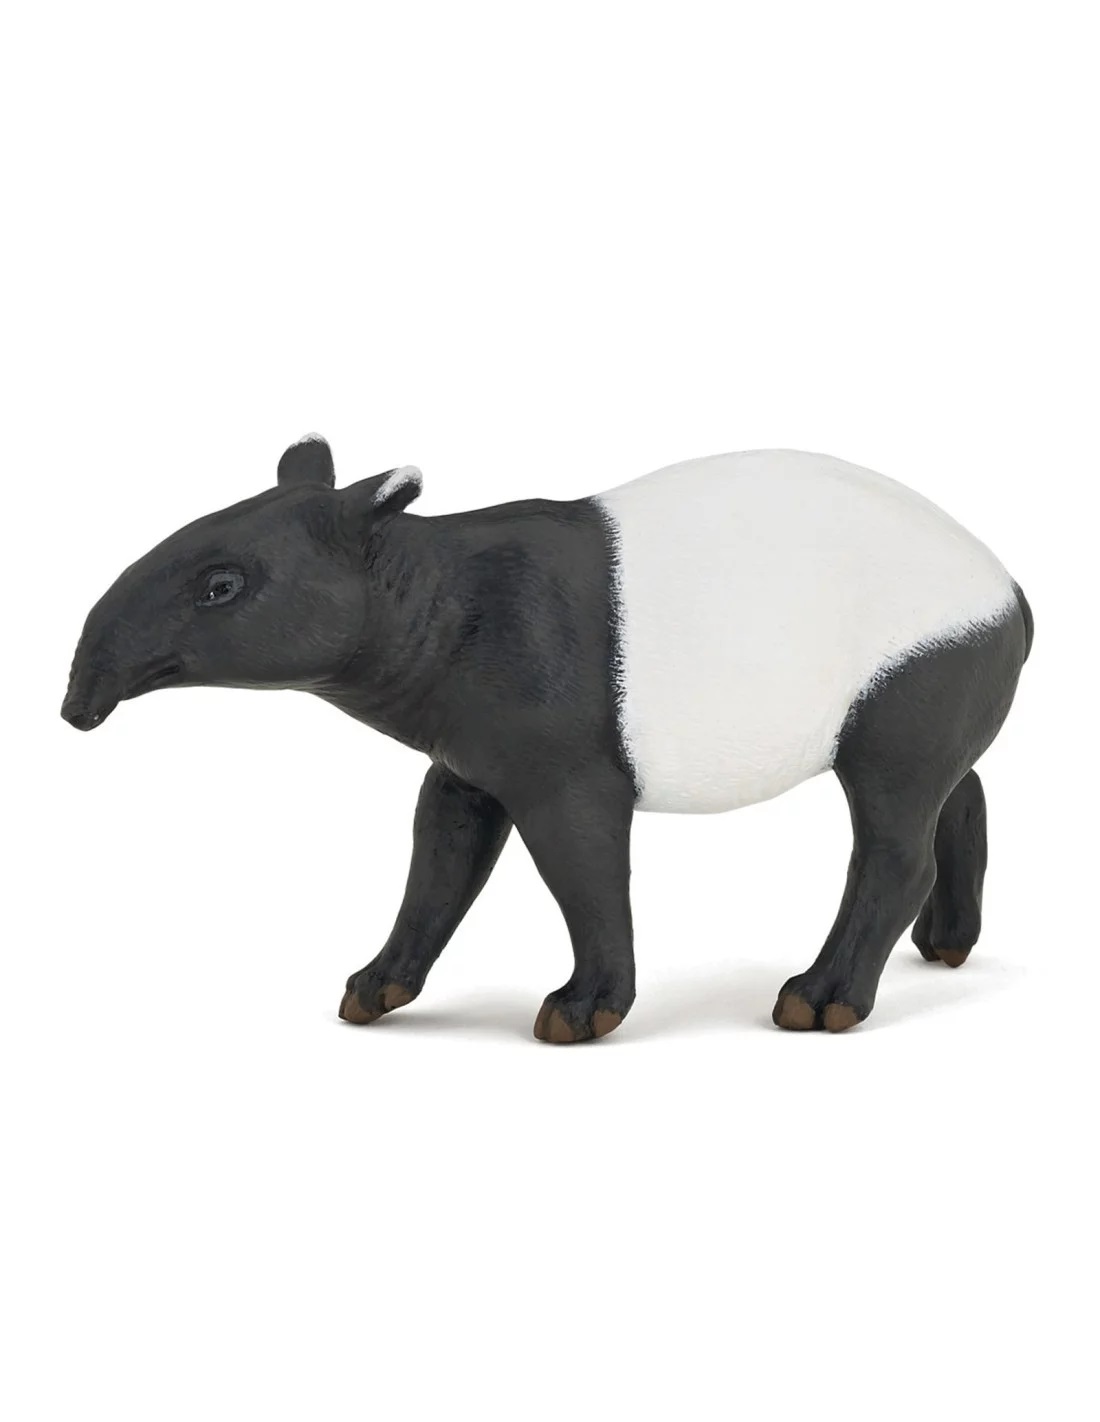 Figurines d'animaux sauvages Papo